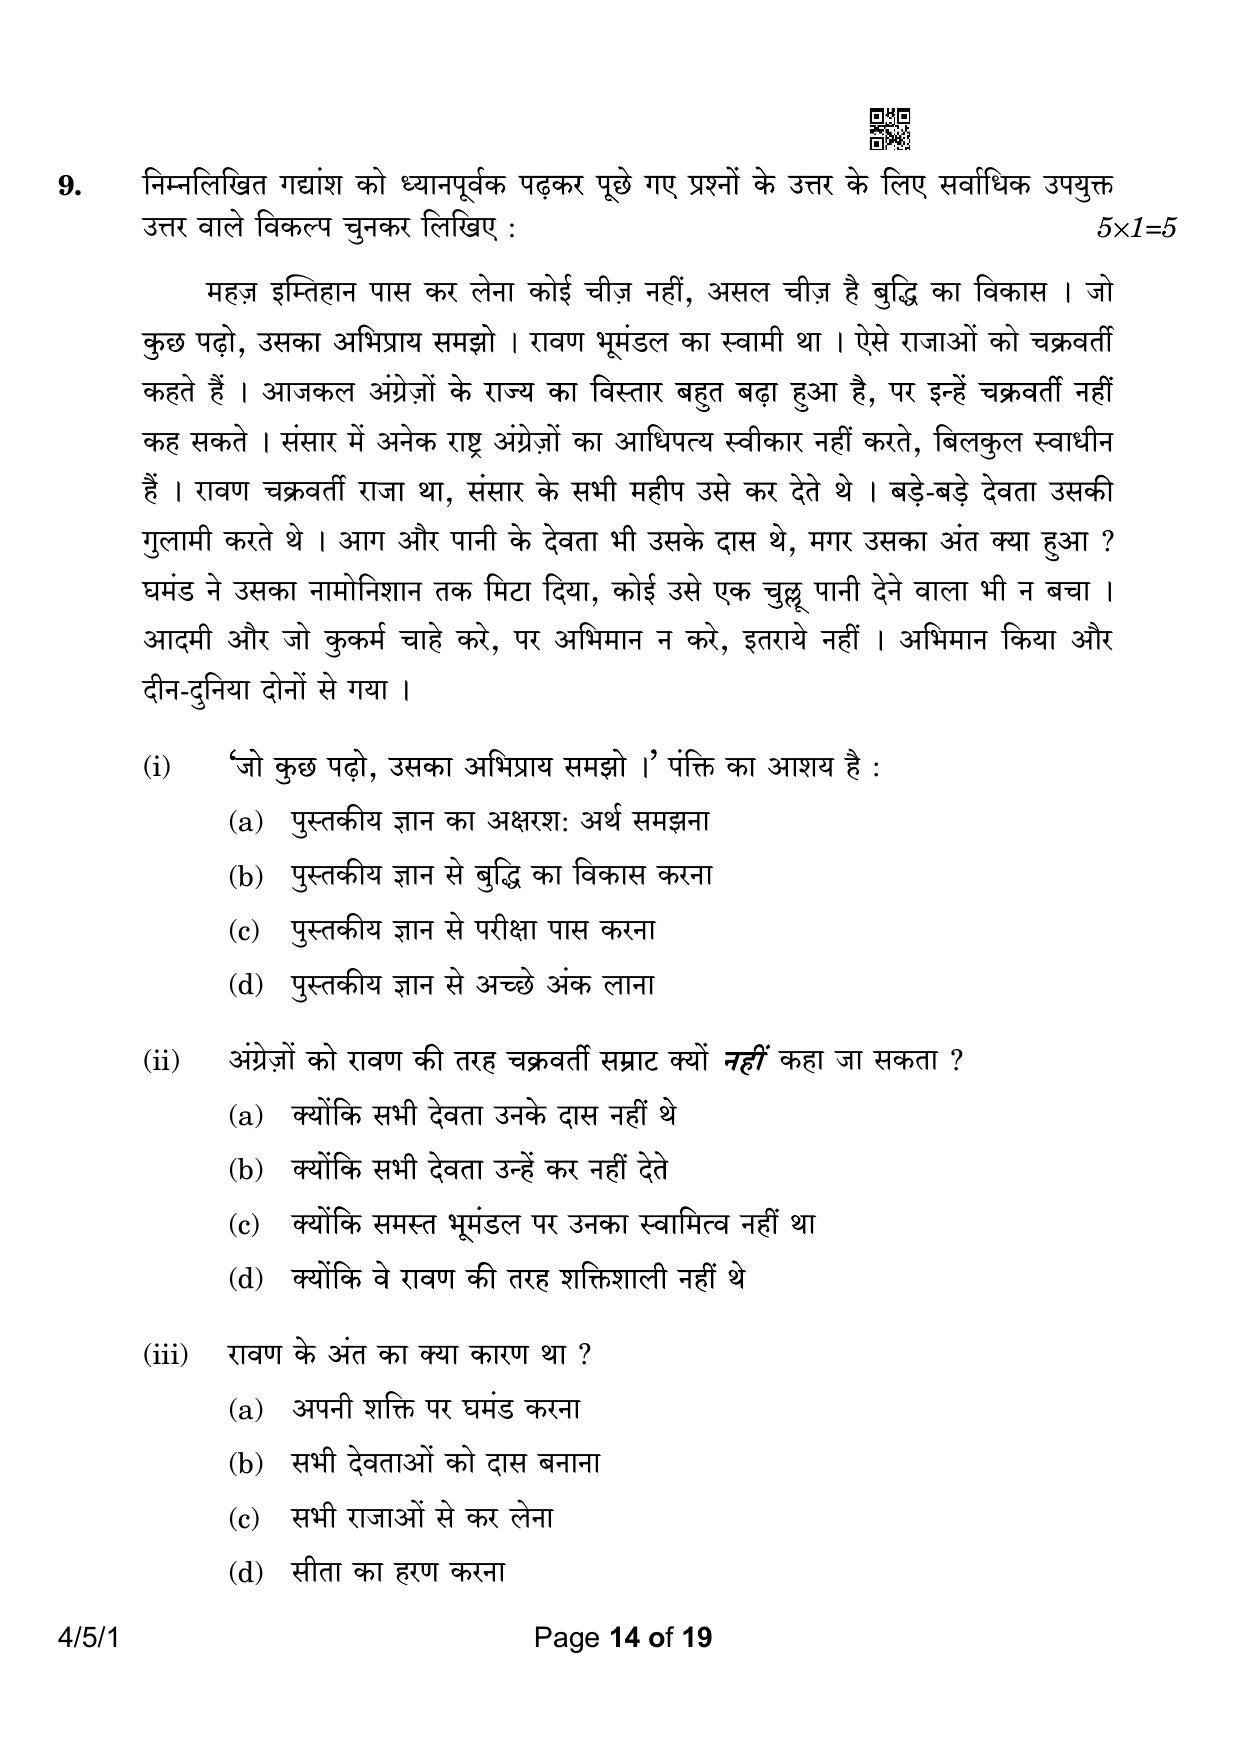 CBSE Class 10 4-5-1 Hindi B 2023 Question Paper - Page 14